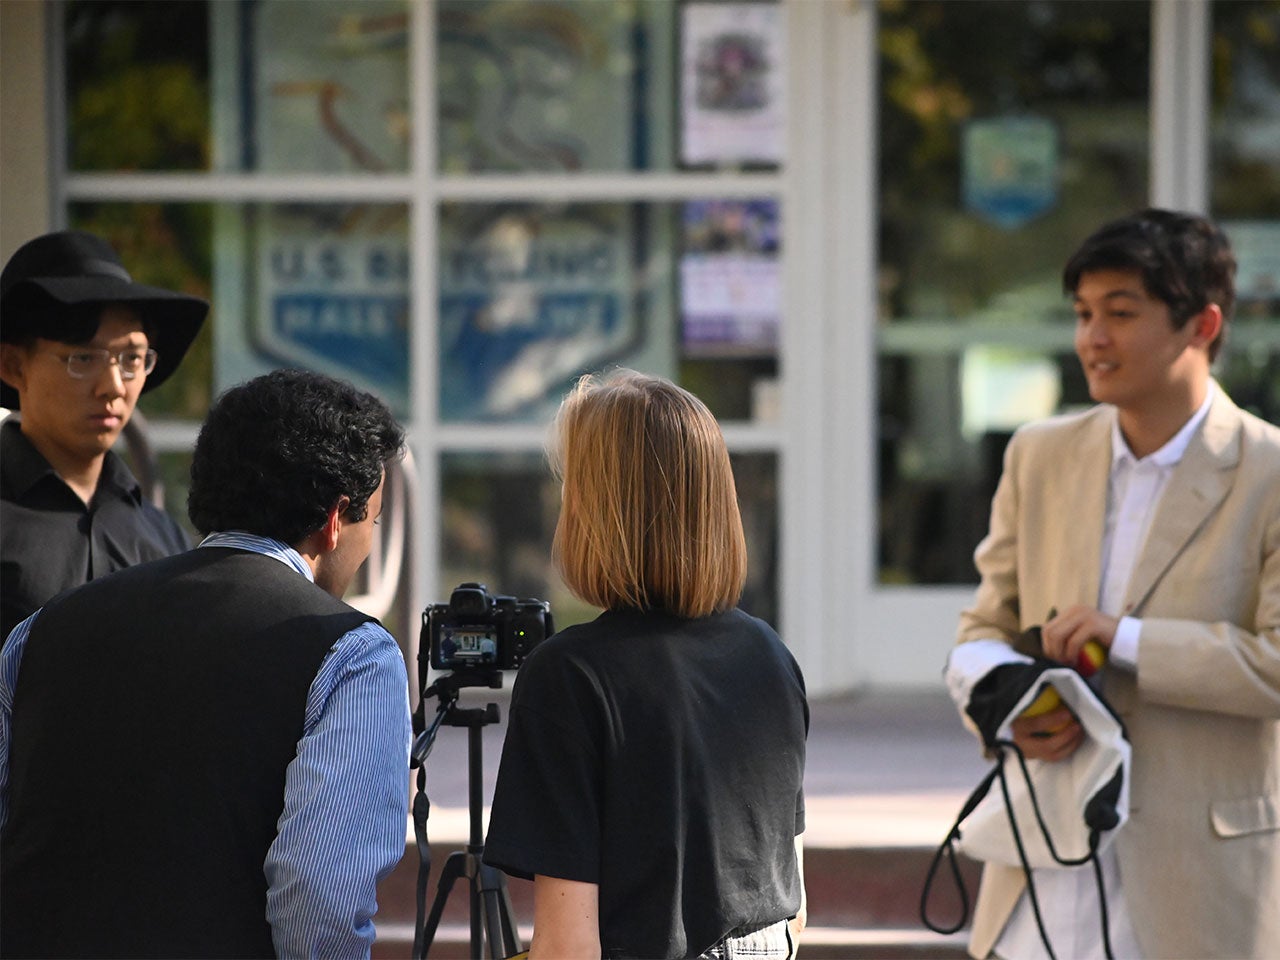 Three ˽̳ Davis students review footage while an actor waits for instruction.